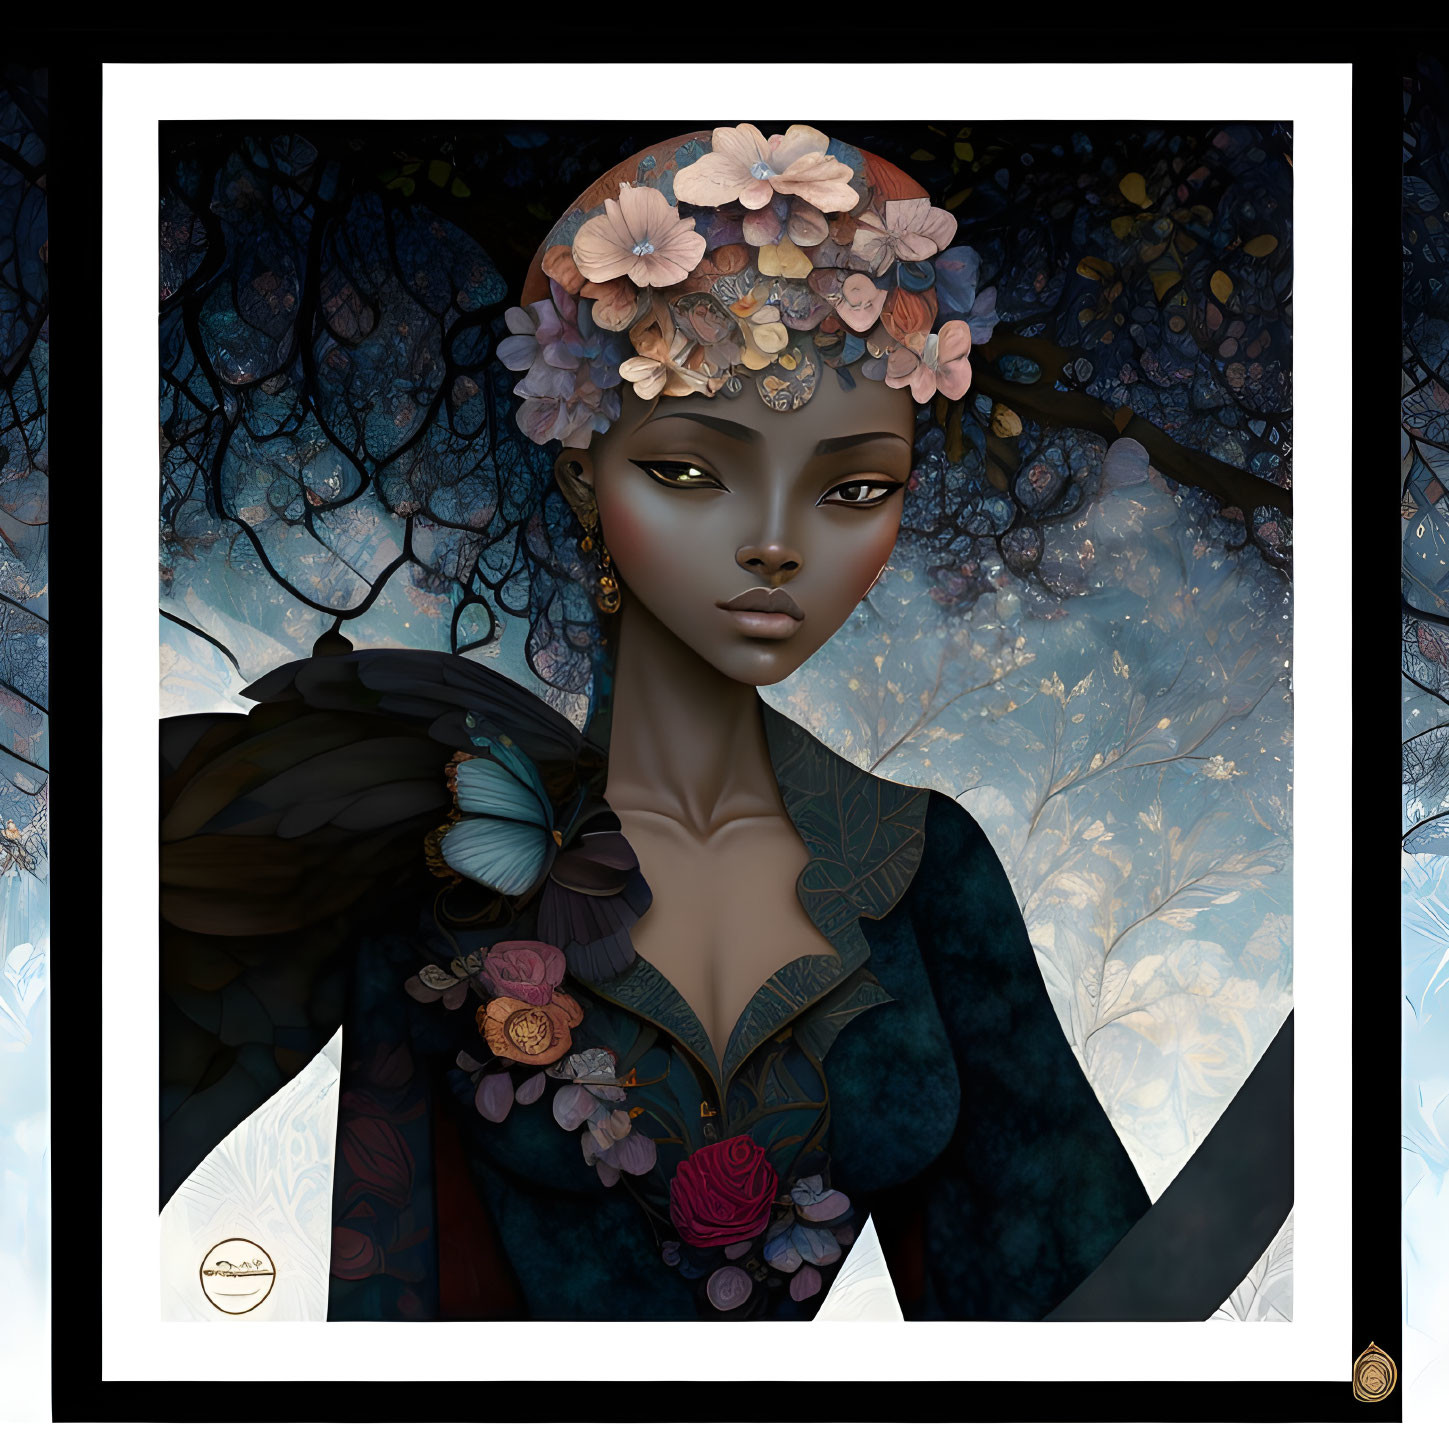 Dark-skinned woman with golden eyes in floral headpiece in mystical forest setting